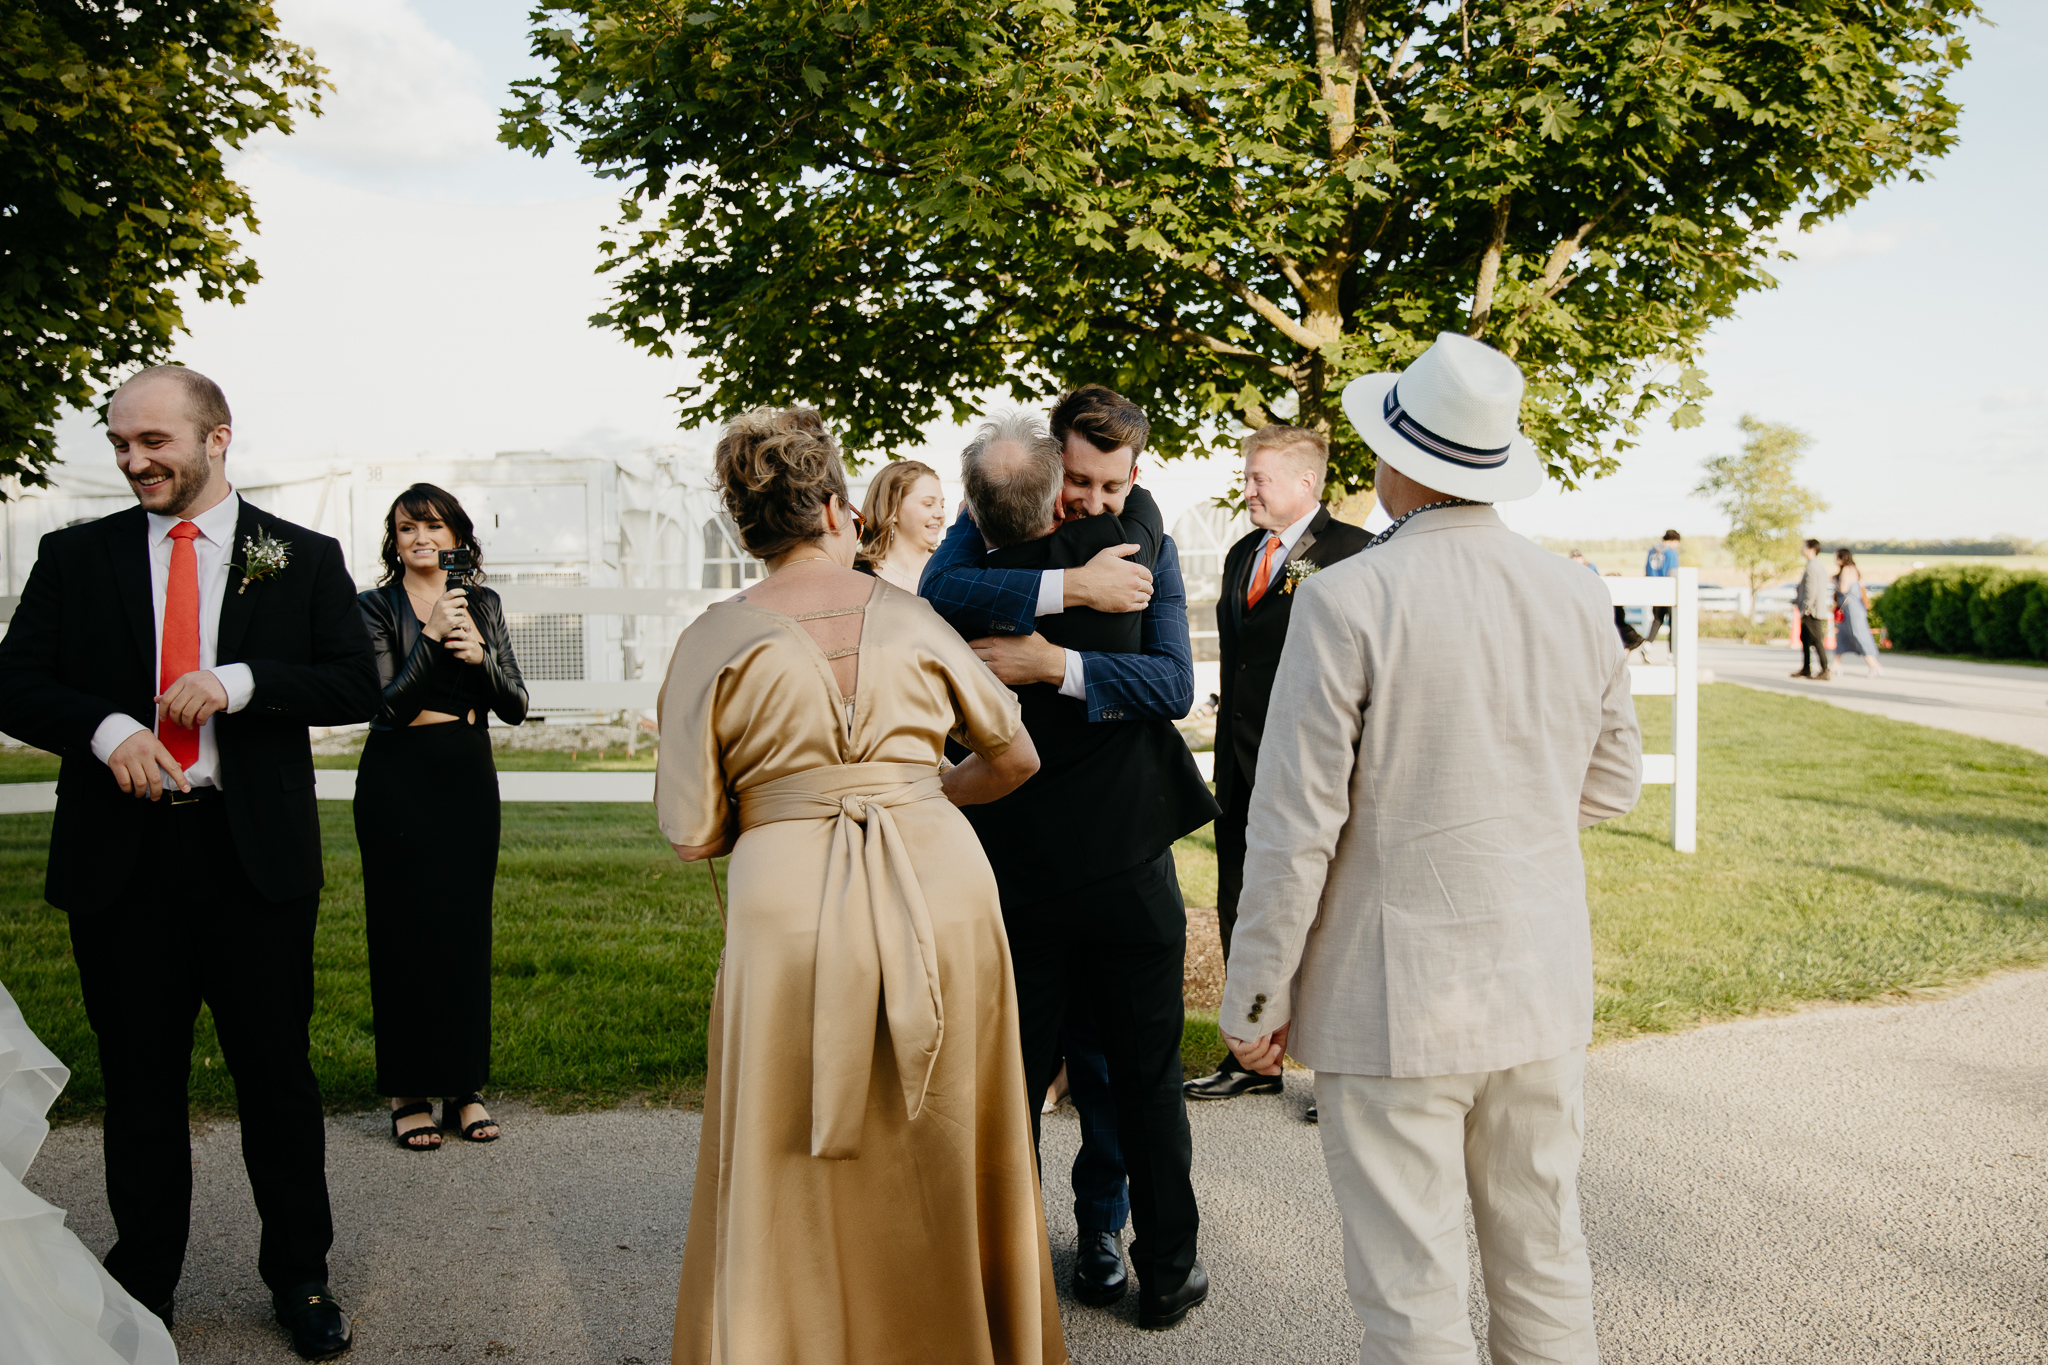 Wedding guests hugging each other and bride and groom after an outdoor wedding ceremony at Northfork Farm